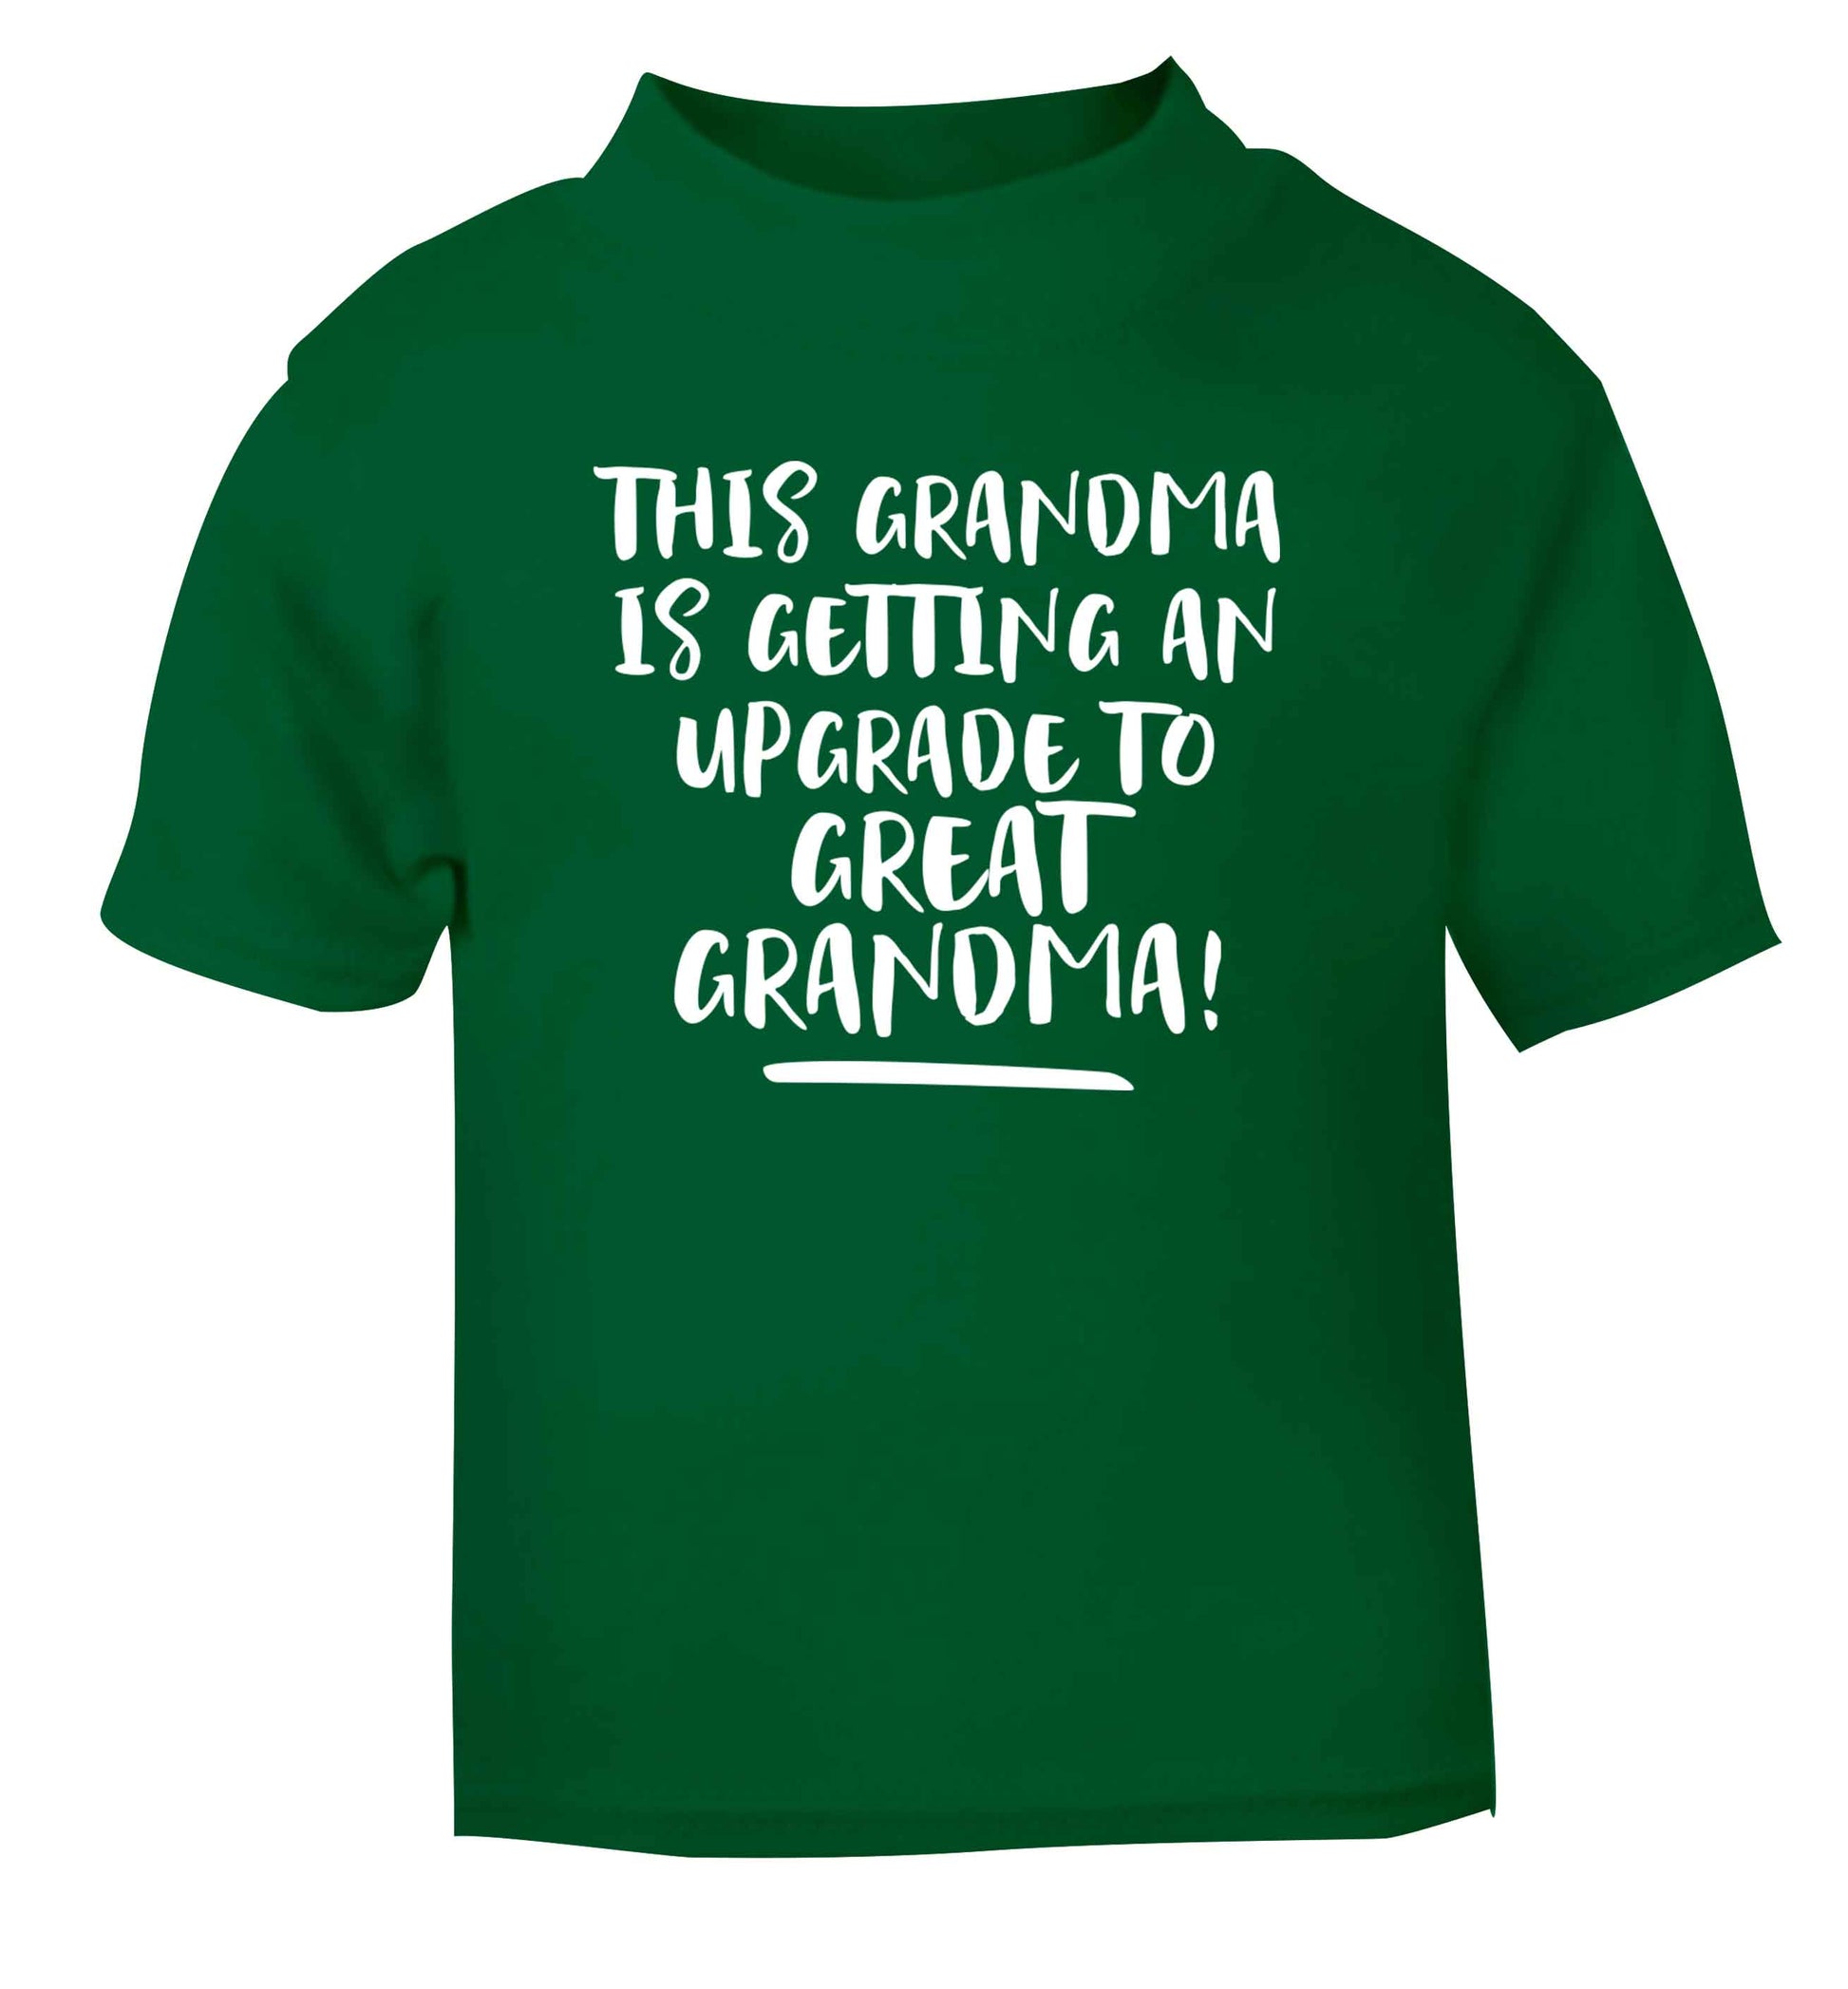 This grandma is getting an upgrade to great grandma! green Baby Toddler Tshirt 2 Years